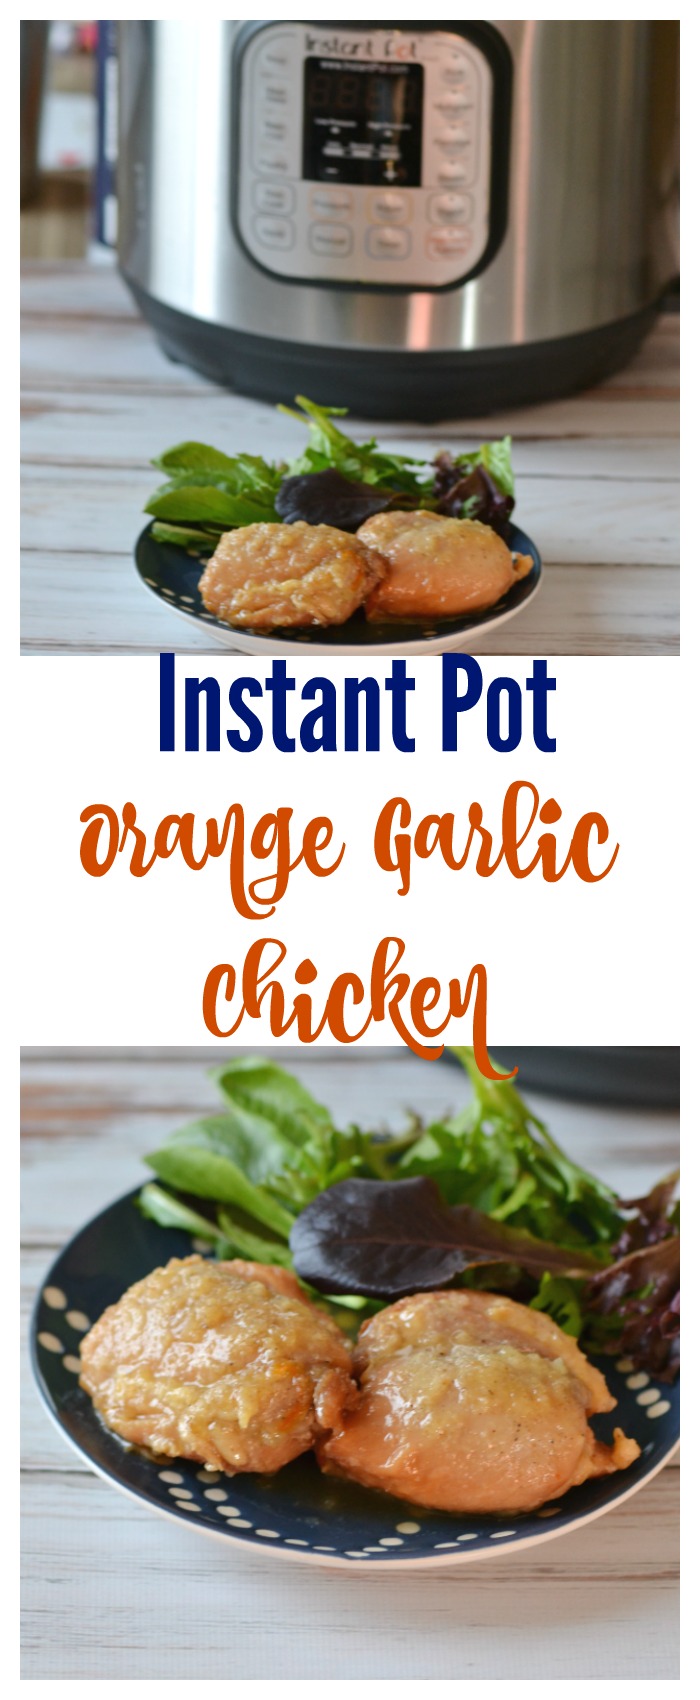 Instant Pot Garlic Orange Chicken is an easy instant pot recipe. A yummy sauce and easy prep make this a great recipe for instant pot beginners.